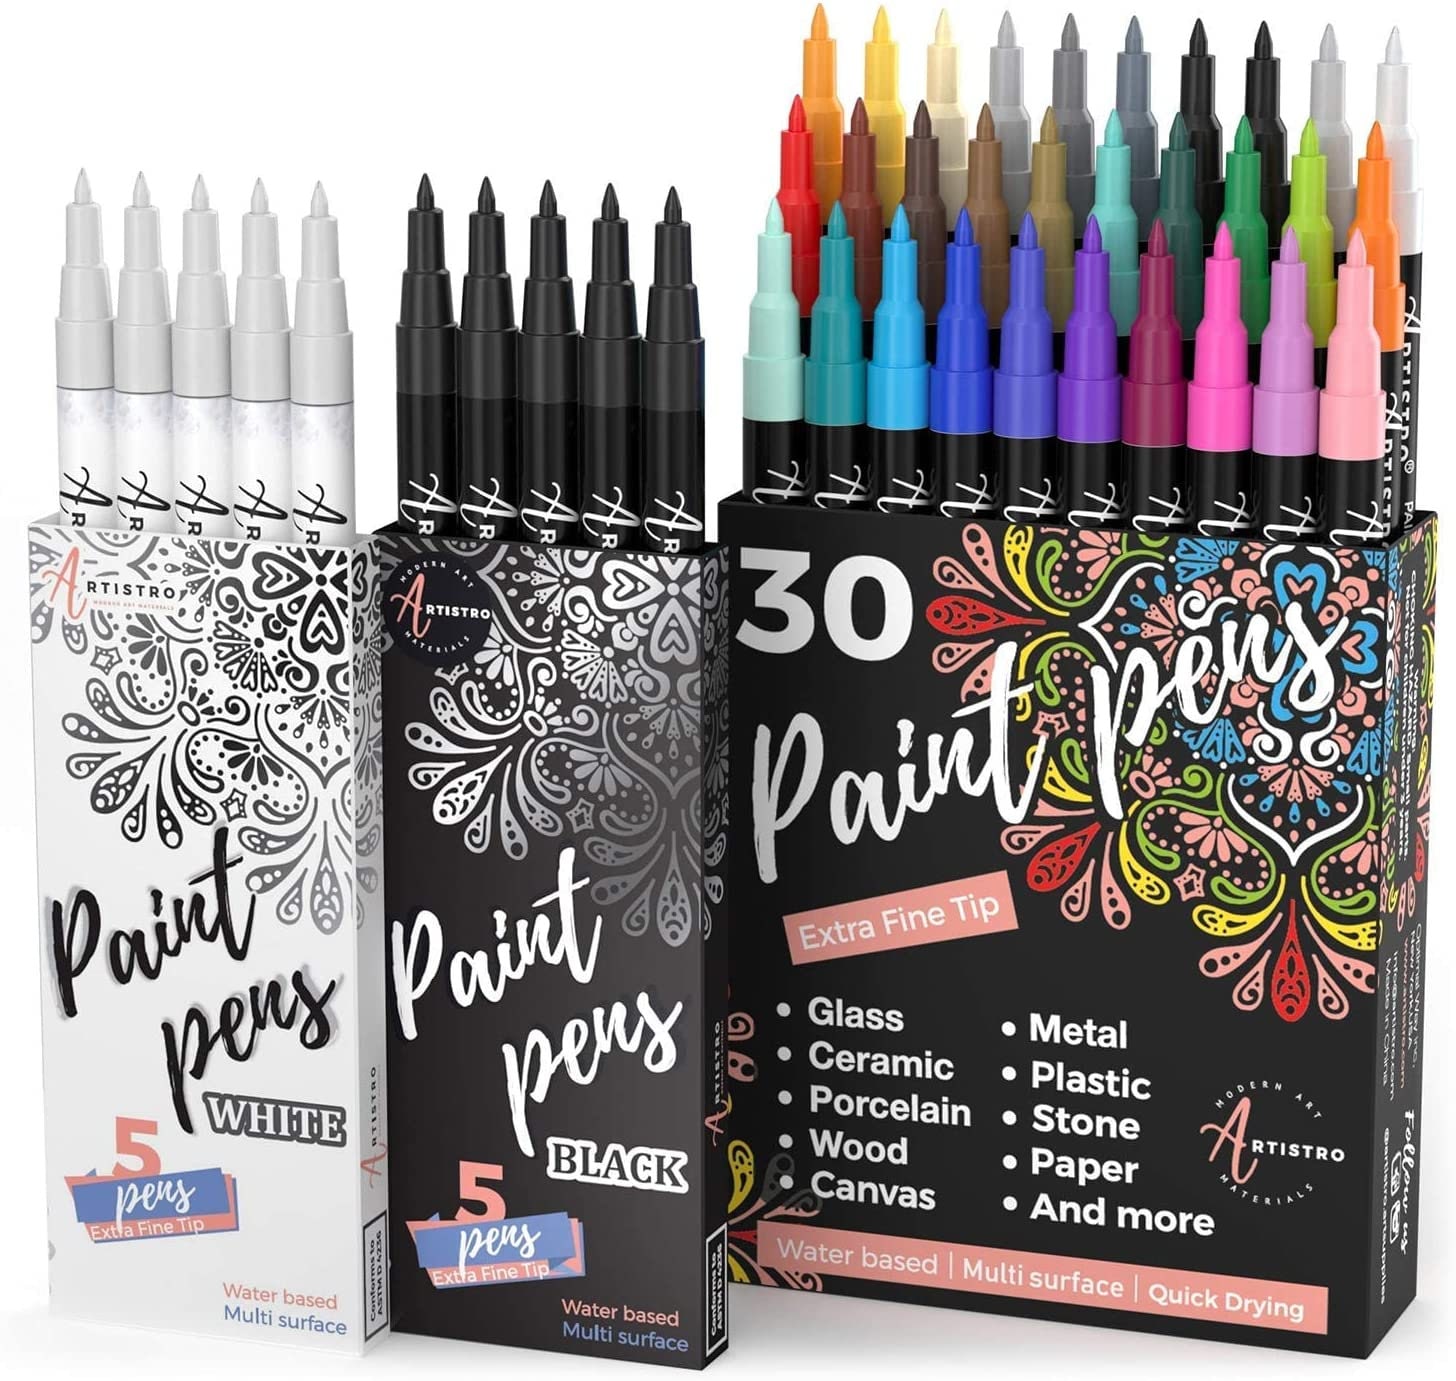 Black Paint Pens for Rock Painting, Stone, Ceramic, Glass. Extra Fine Point  Tip, Set of 5 Black Acrylic Paint Markers. 